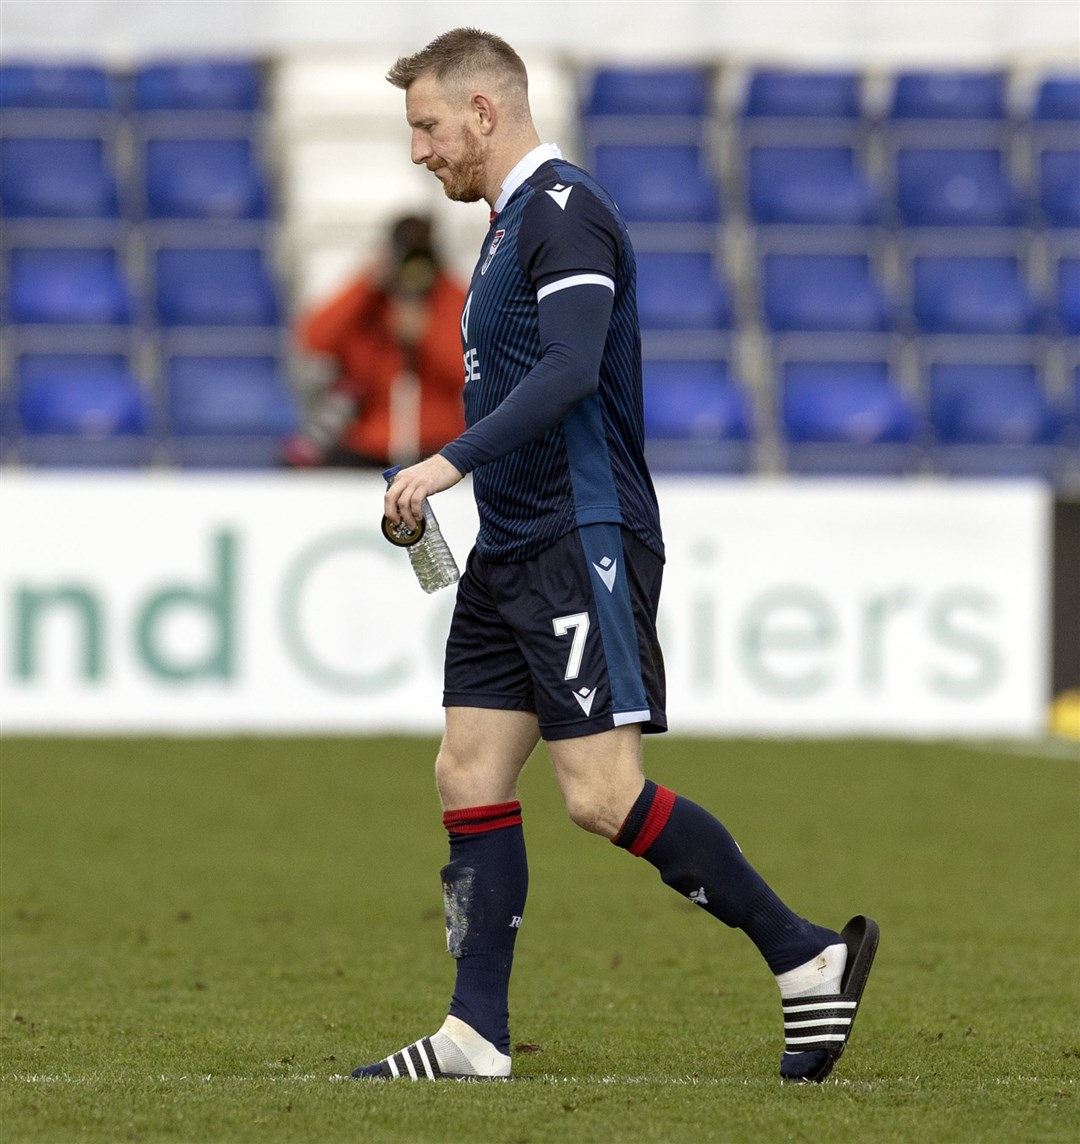 Ross County's Michael Gardyne has been the subject of controversy after allegedly making homophobic comments during the match against Rangers on Sunday. Picture: Ken Macpherson